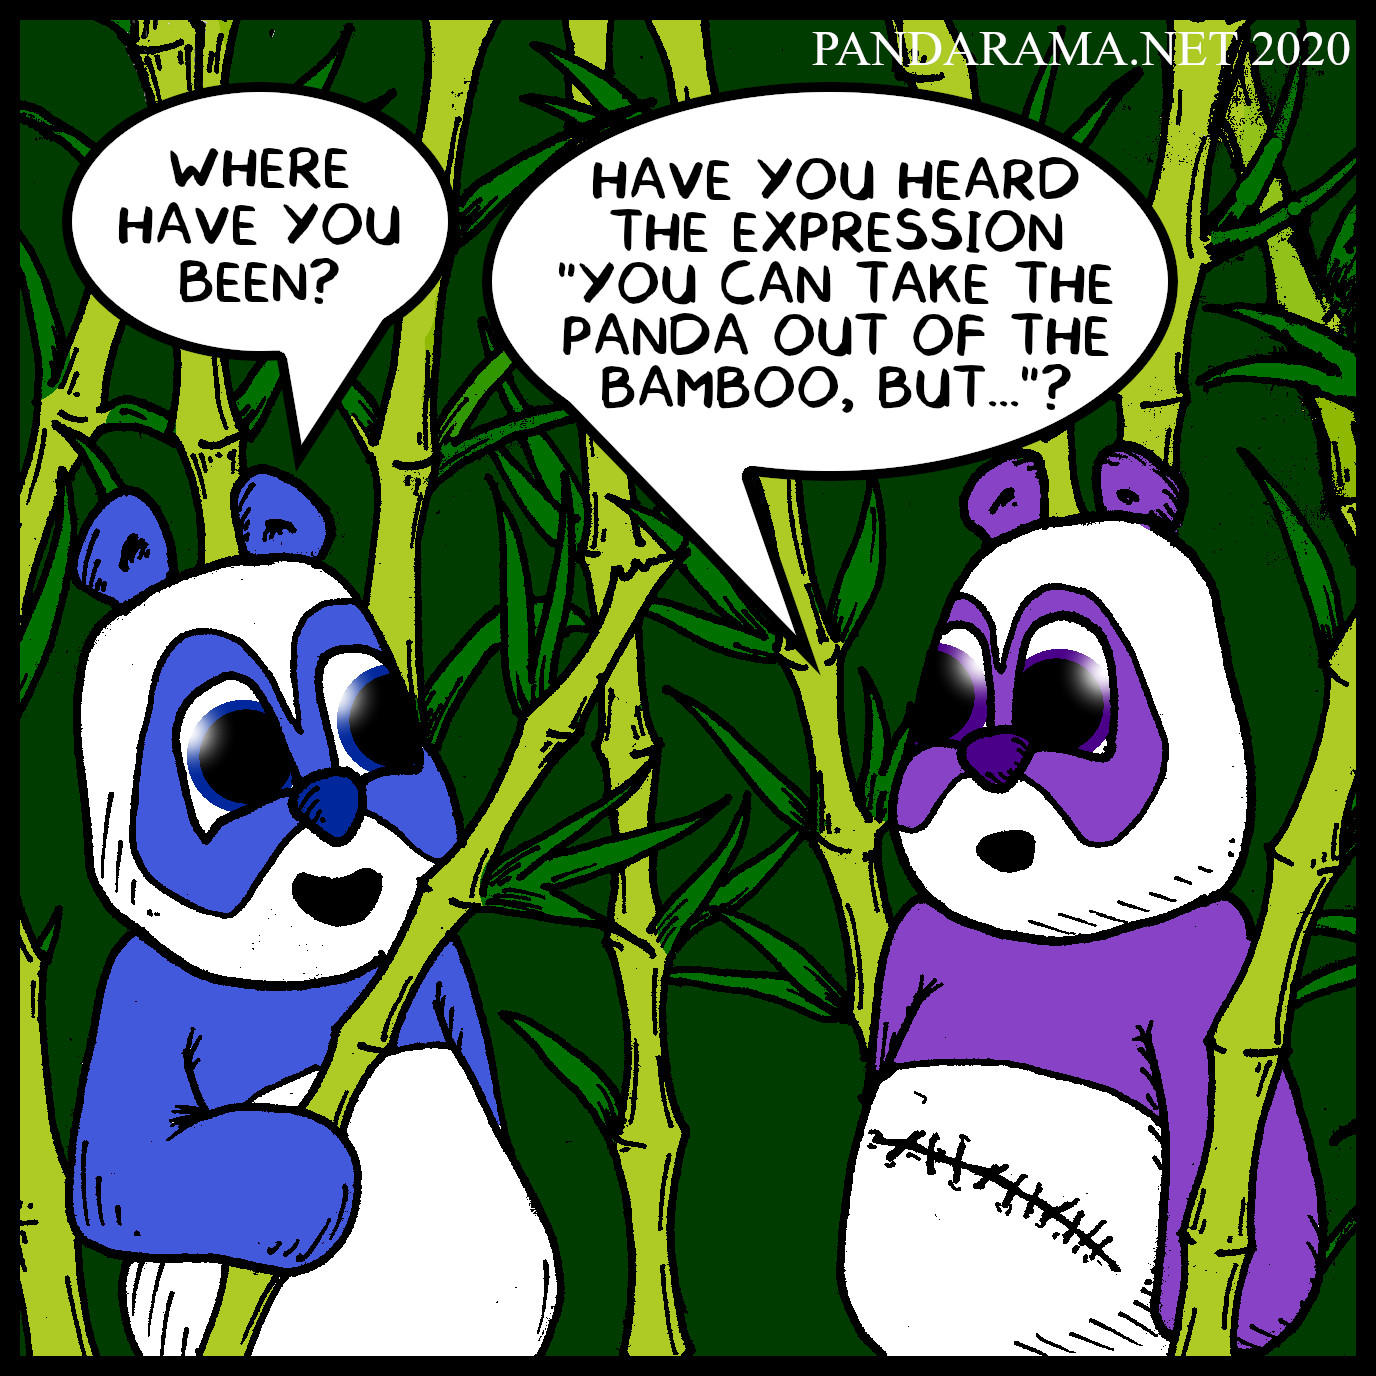 comicstrip. you can take the panda out of the bamboo, but.